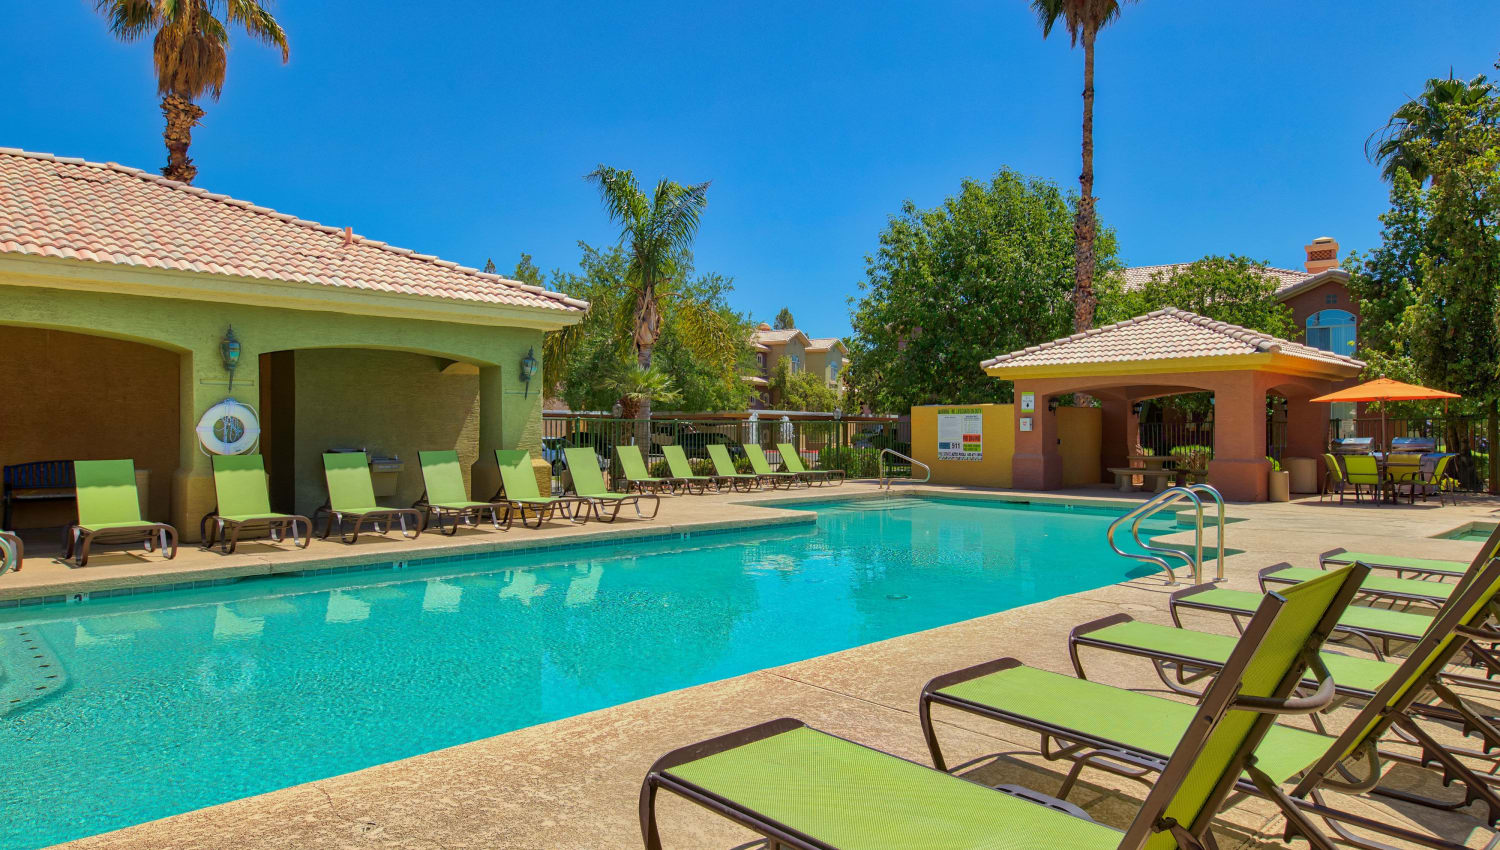 Sparkling pool with lounge chairs at Serena Shores Apartments in Gilbert, Arizona